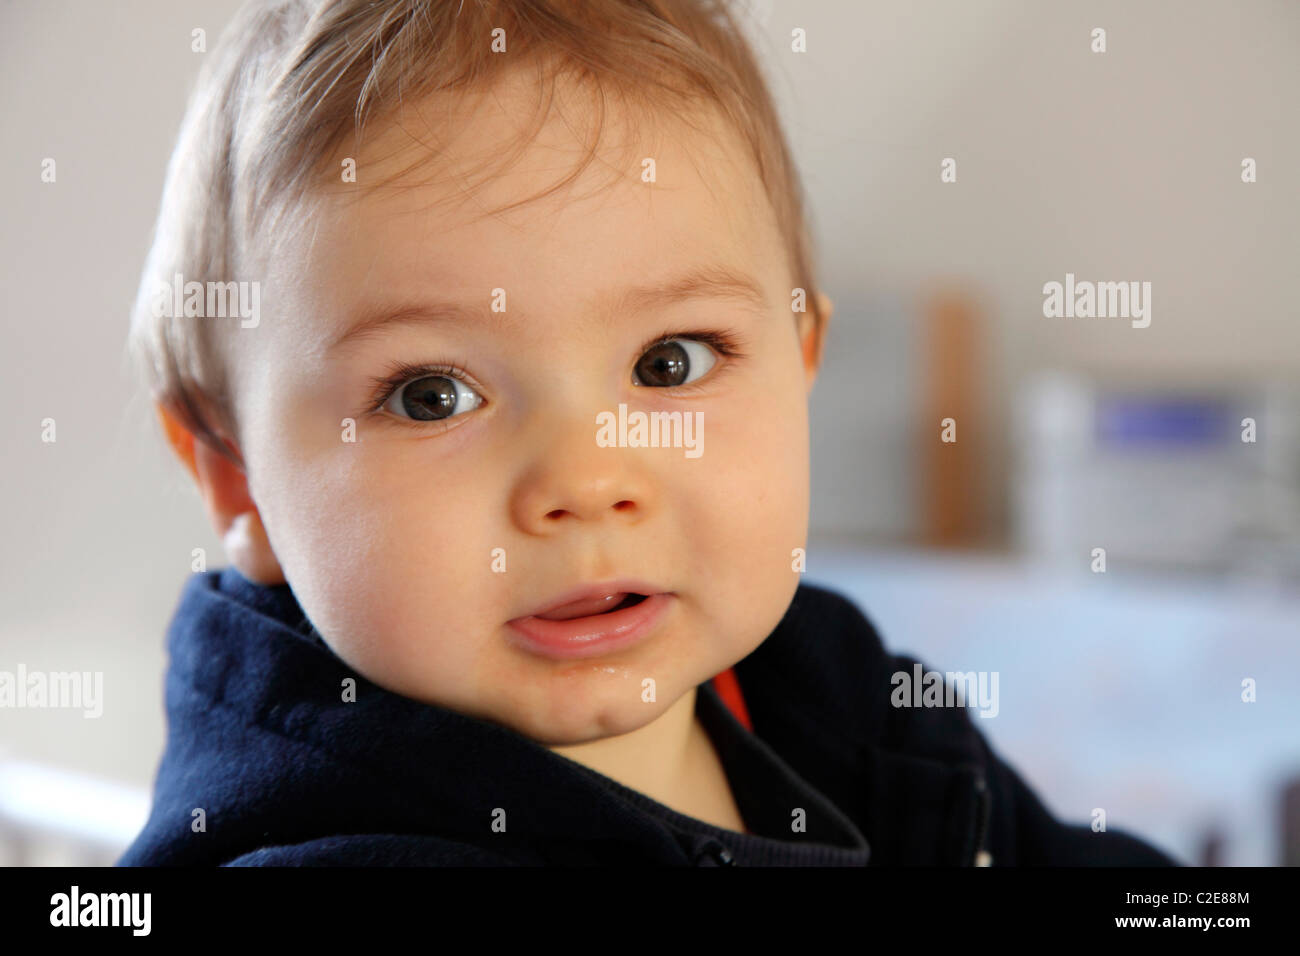 Little boy, baby, 10 month old, looking friendly. Stock Photo